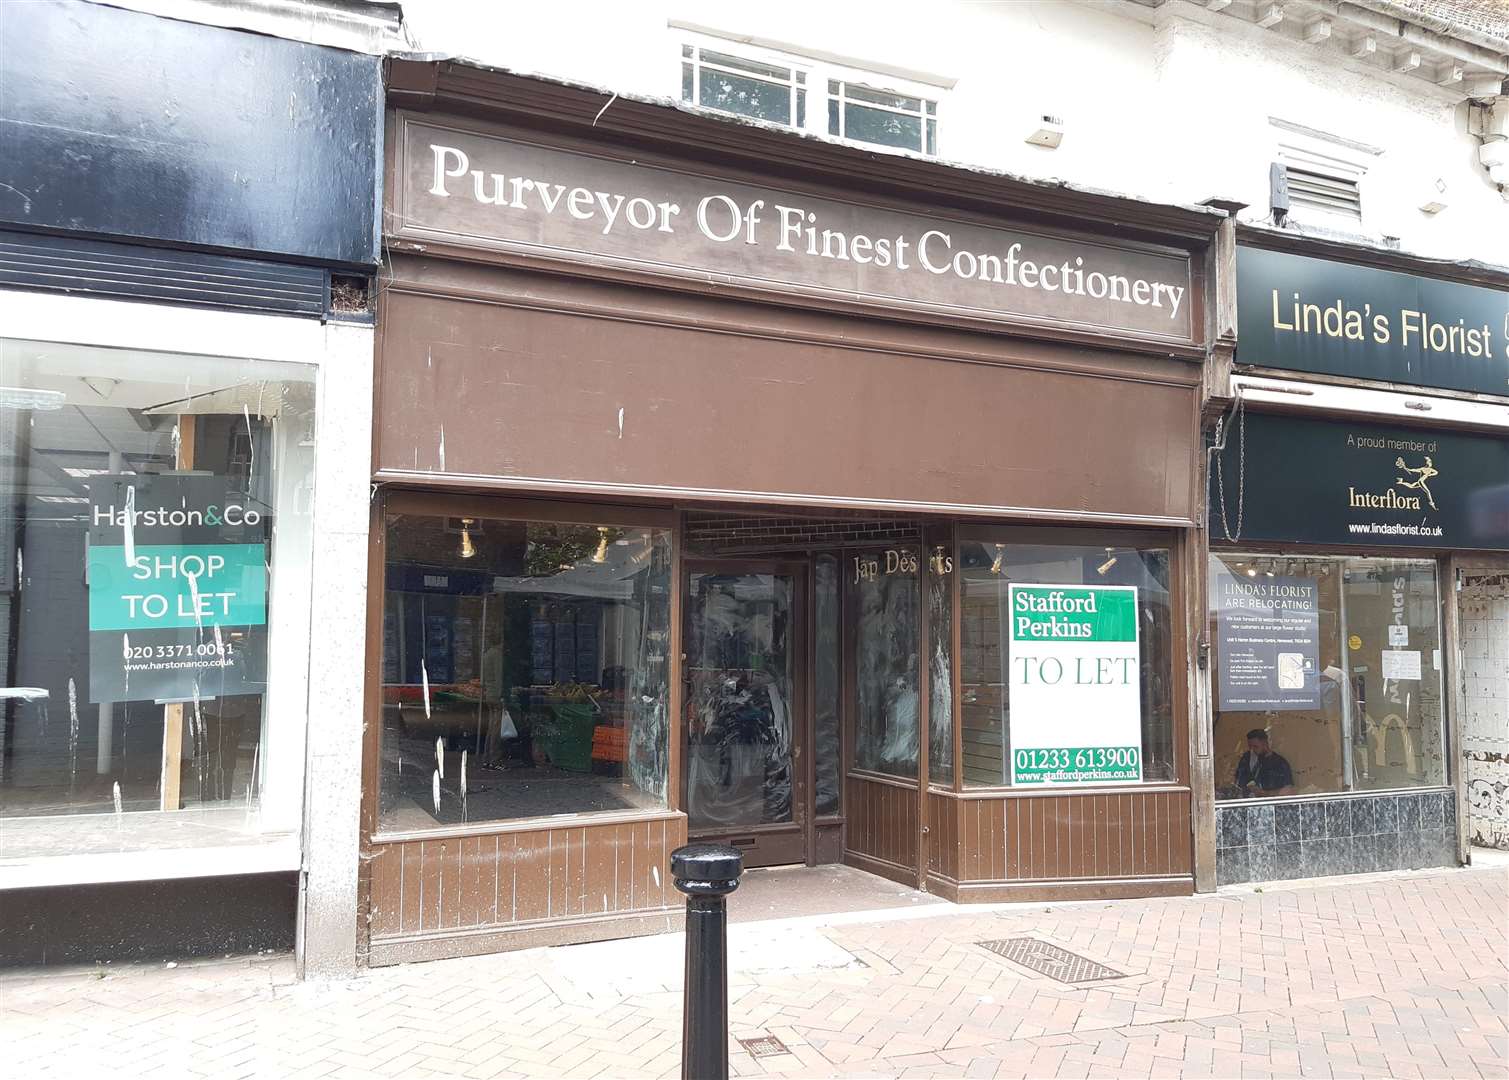 The former sweet shop closed in 2020